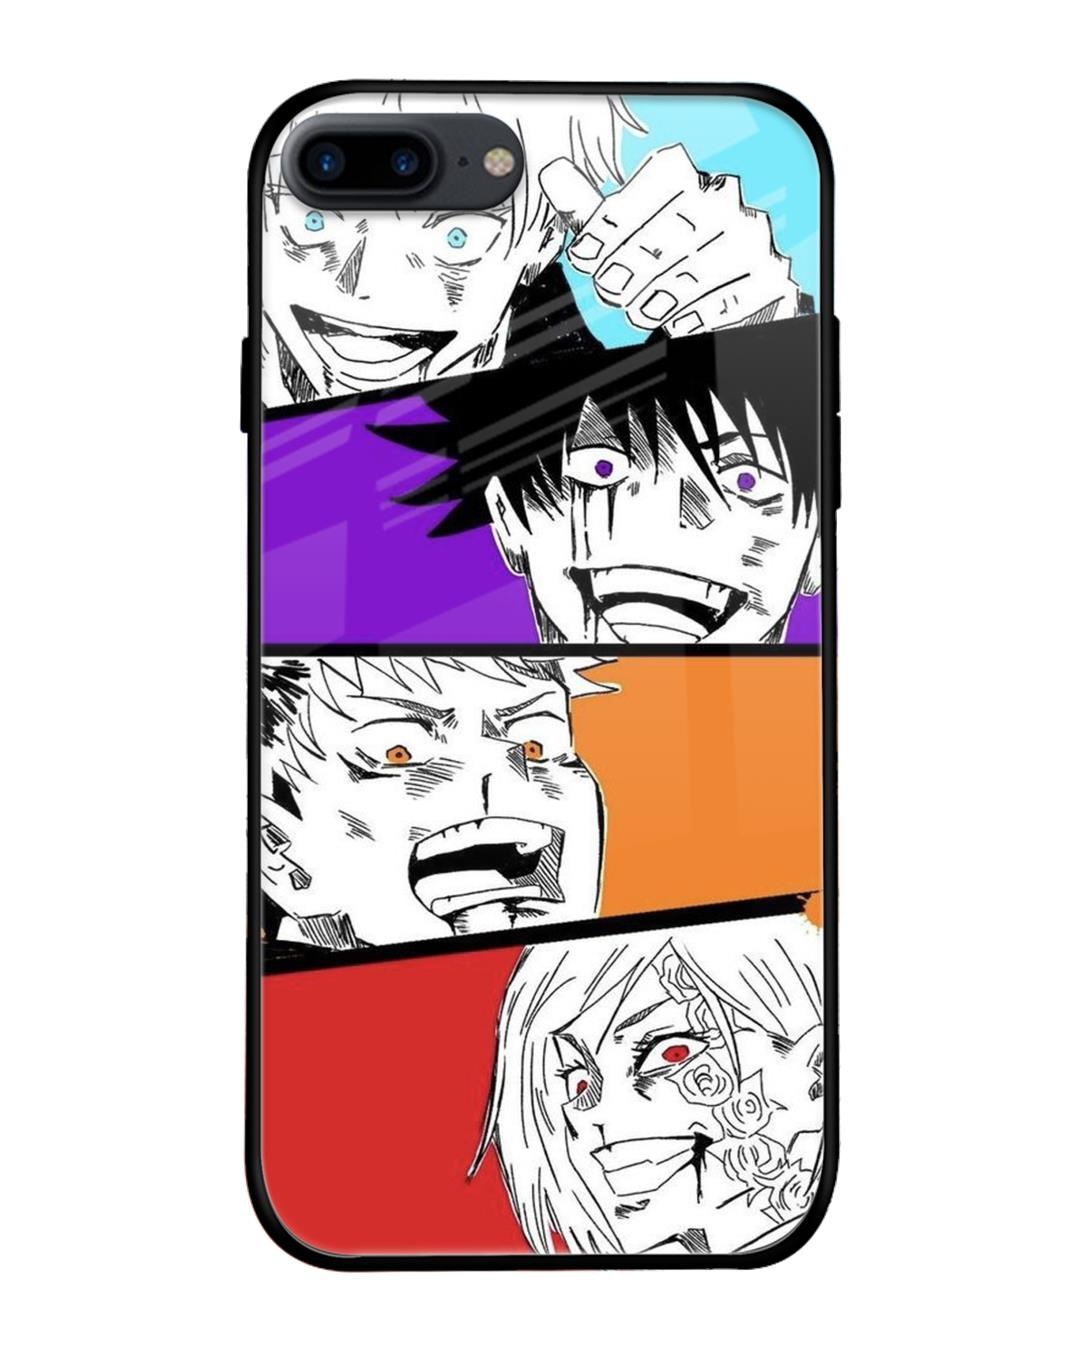 Buy Cartton Anime Apple Iphone 7 Mobile Cover at Rs 99 Only  Zapvi